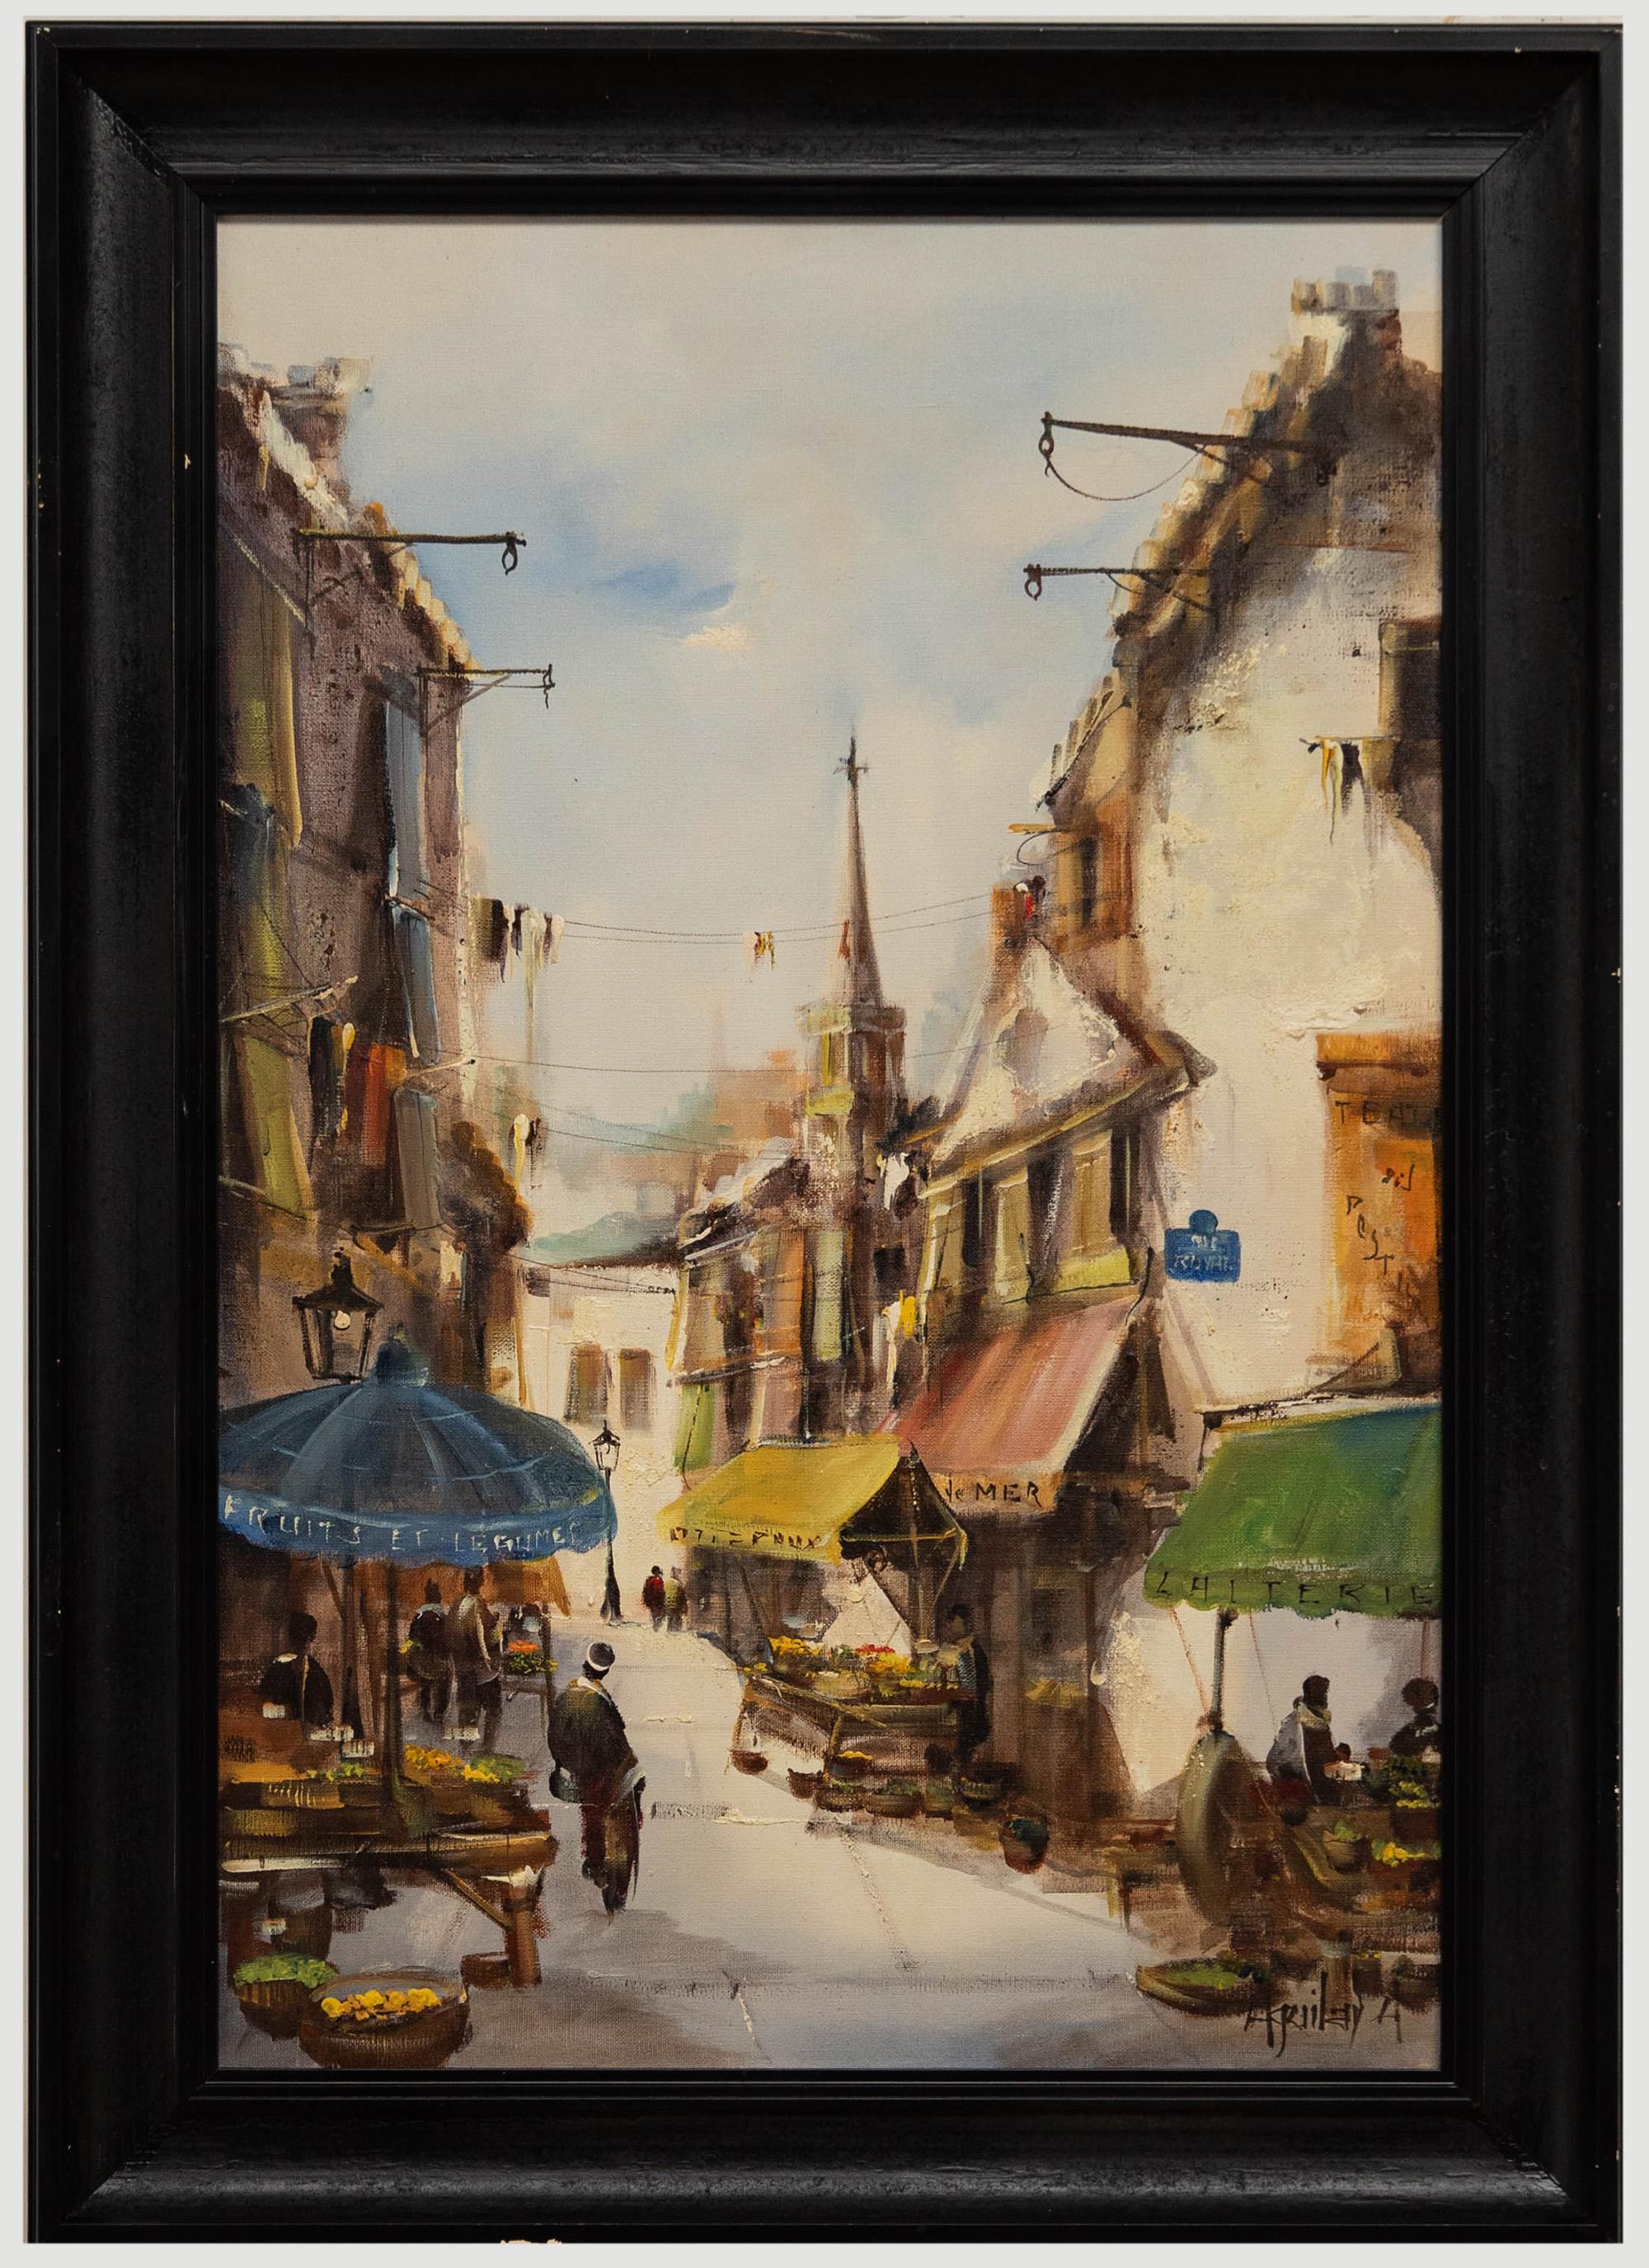 Spanish School - Jorge Aguilar-Agon (b.1936), original oil painting. Signed lower right. Presented in a bold black frame. On canvas on stretchers. 